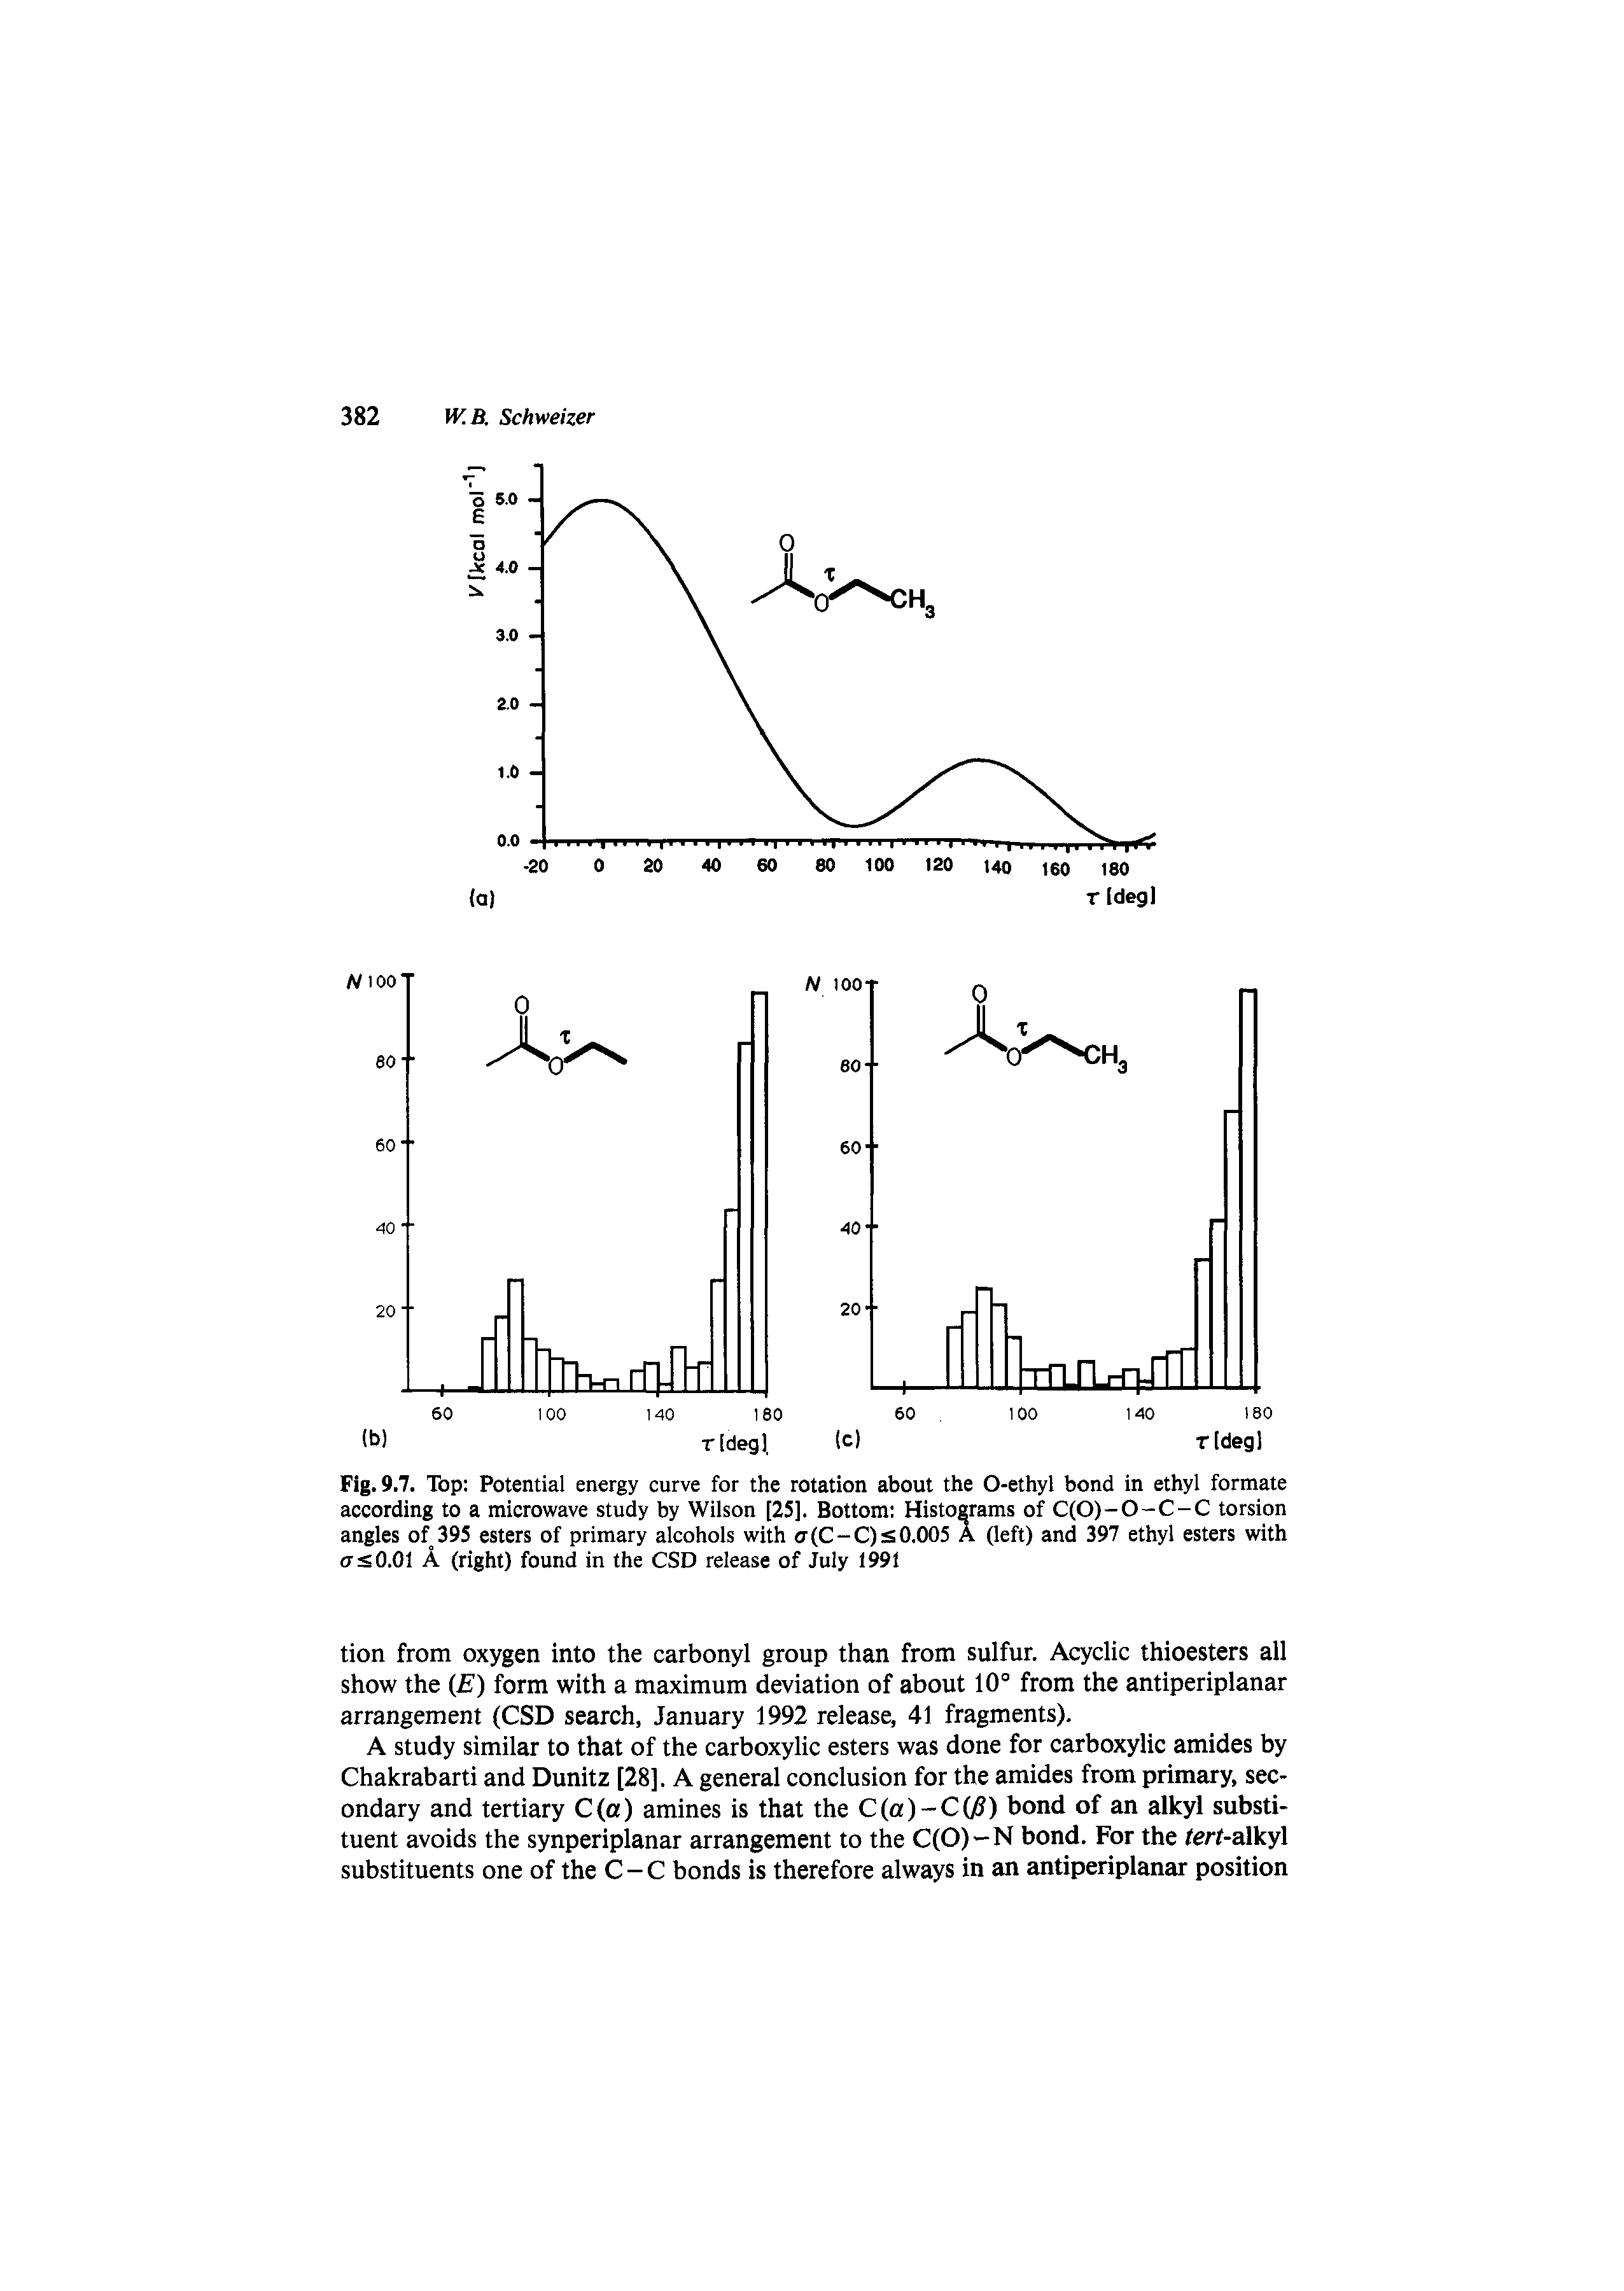 Fig. 9.7. Top Potential energy curve for the rotation about the 0-ethyl bond in ethyl formate according to a microwave study by Wilson [25]. Bottom Histograms of C(0)-0-C-C torsion angles of 395 esters of primary alcohols with <7(C-C)s 0.005 A (left) and 397 ethyl esters with CTSO.Ol A (right) found in the CSD release of July 199t...